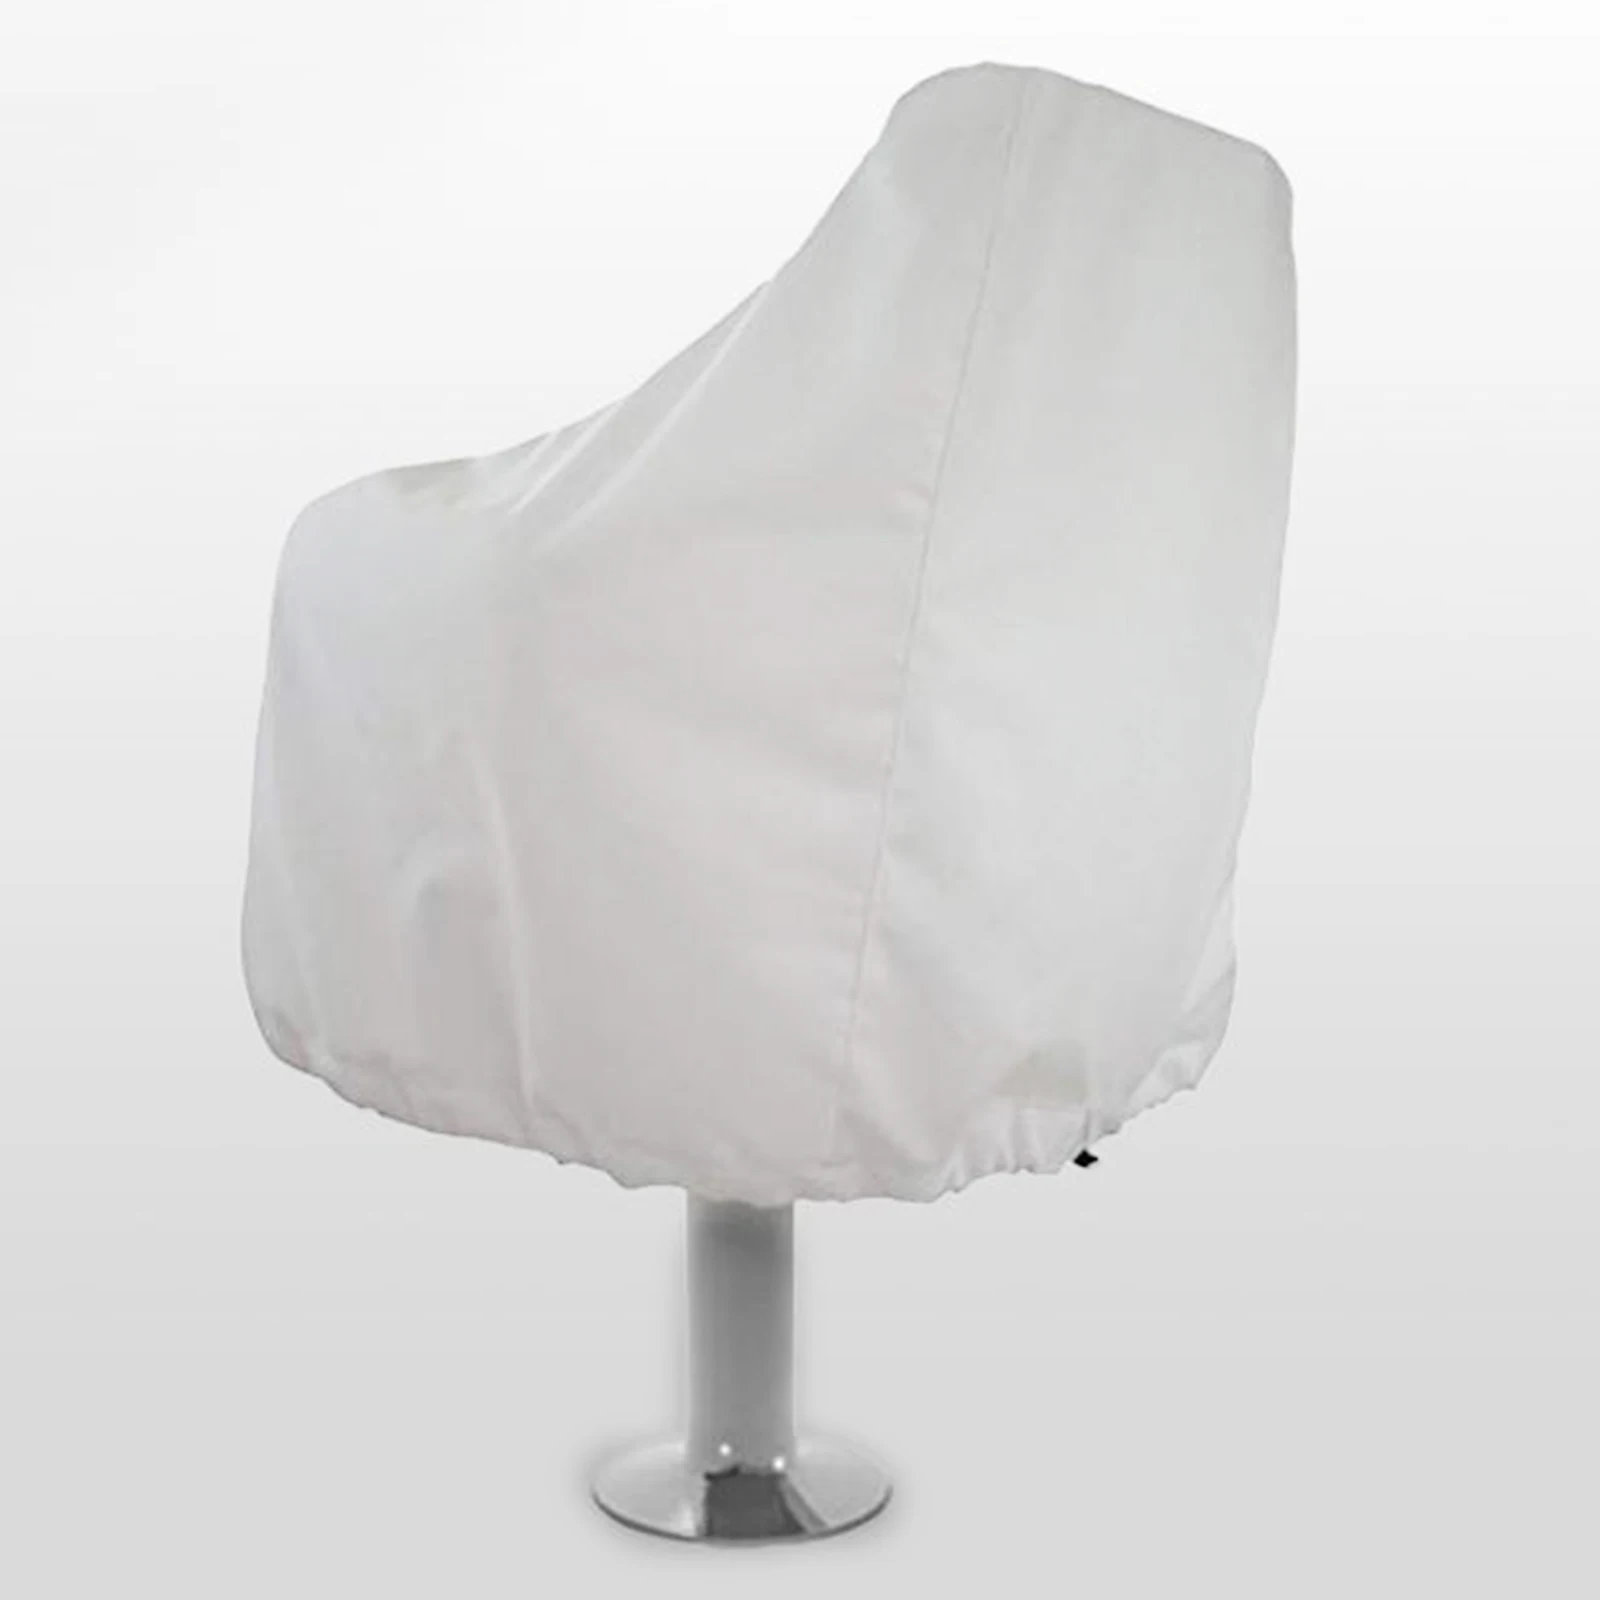 Durable Boat Seat Cover Lift Chair Dust Rain Sun Anti-UV Waterproof Protection Folding Seat Cover Yacht Fishing Boat Accessory